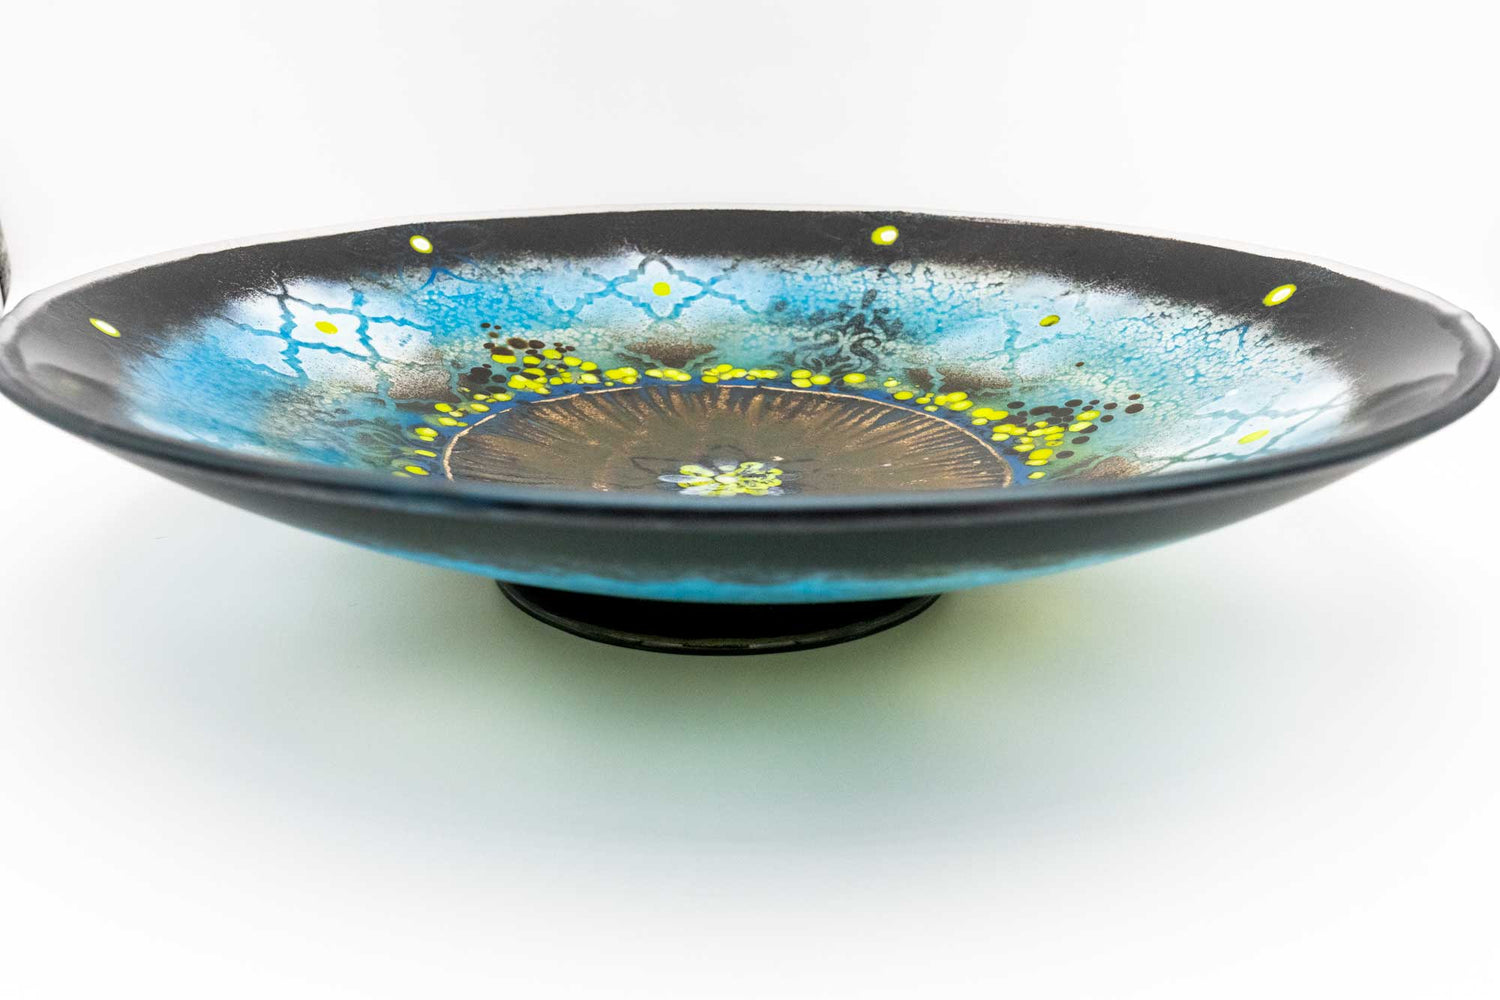 Large glass bowl decorated with an abstract pattern. Dominate colors are blue, black, and chartreuse.